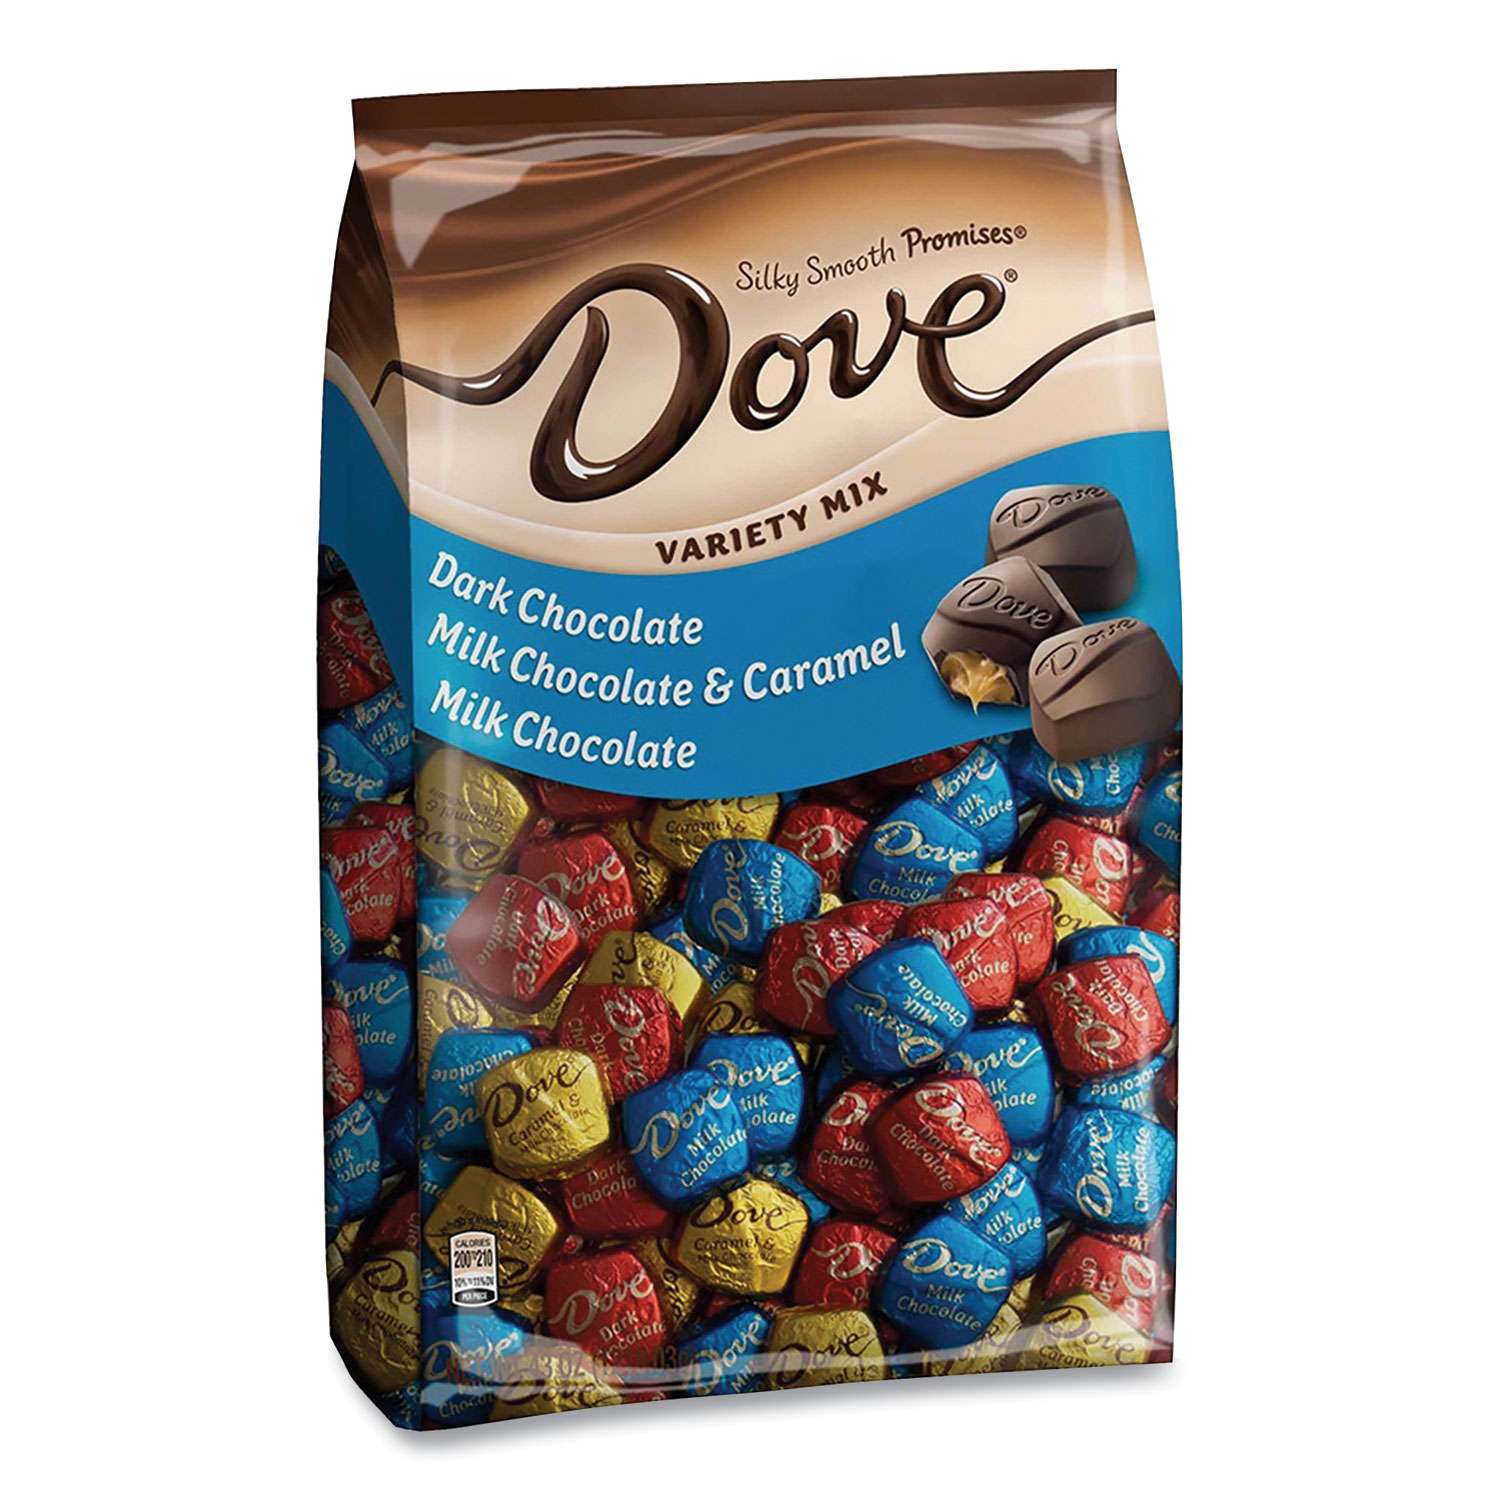  Dove Chocolate 329414 PROMISES Variety Mix, 43.07 oz Bag, Free Delivery in 1-4 Business Days (GRR20900380) 